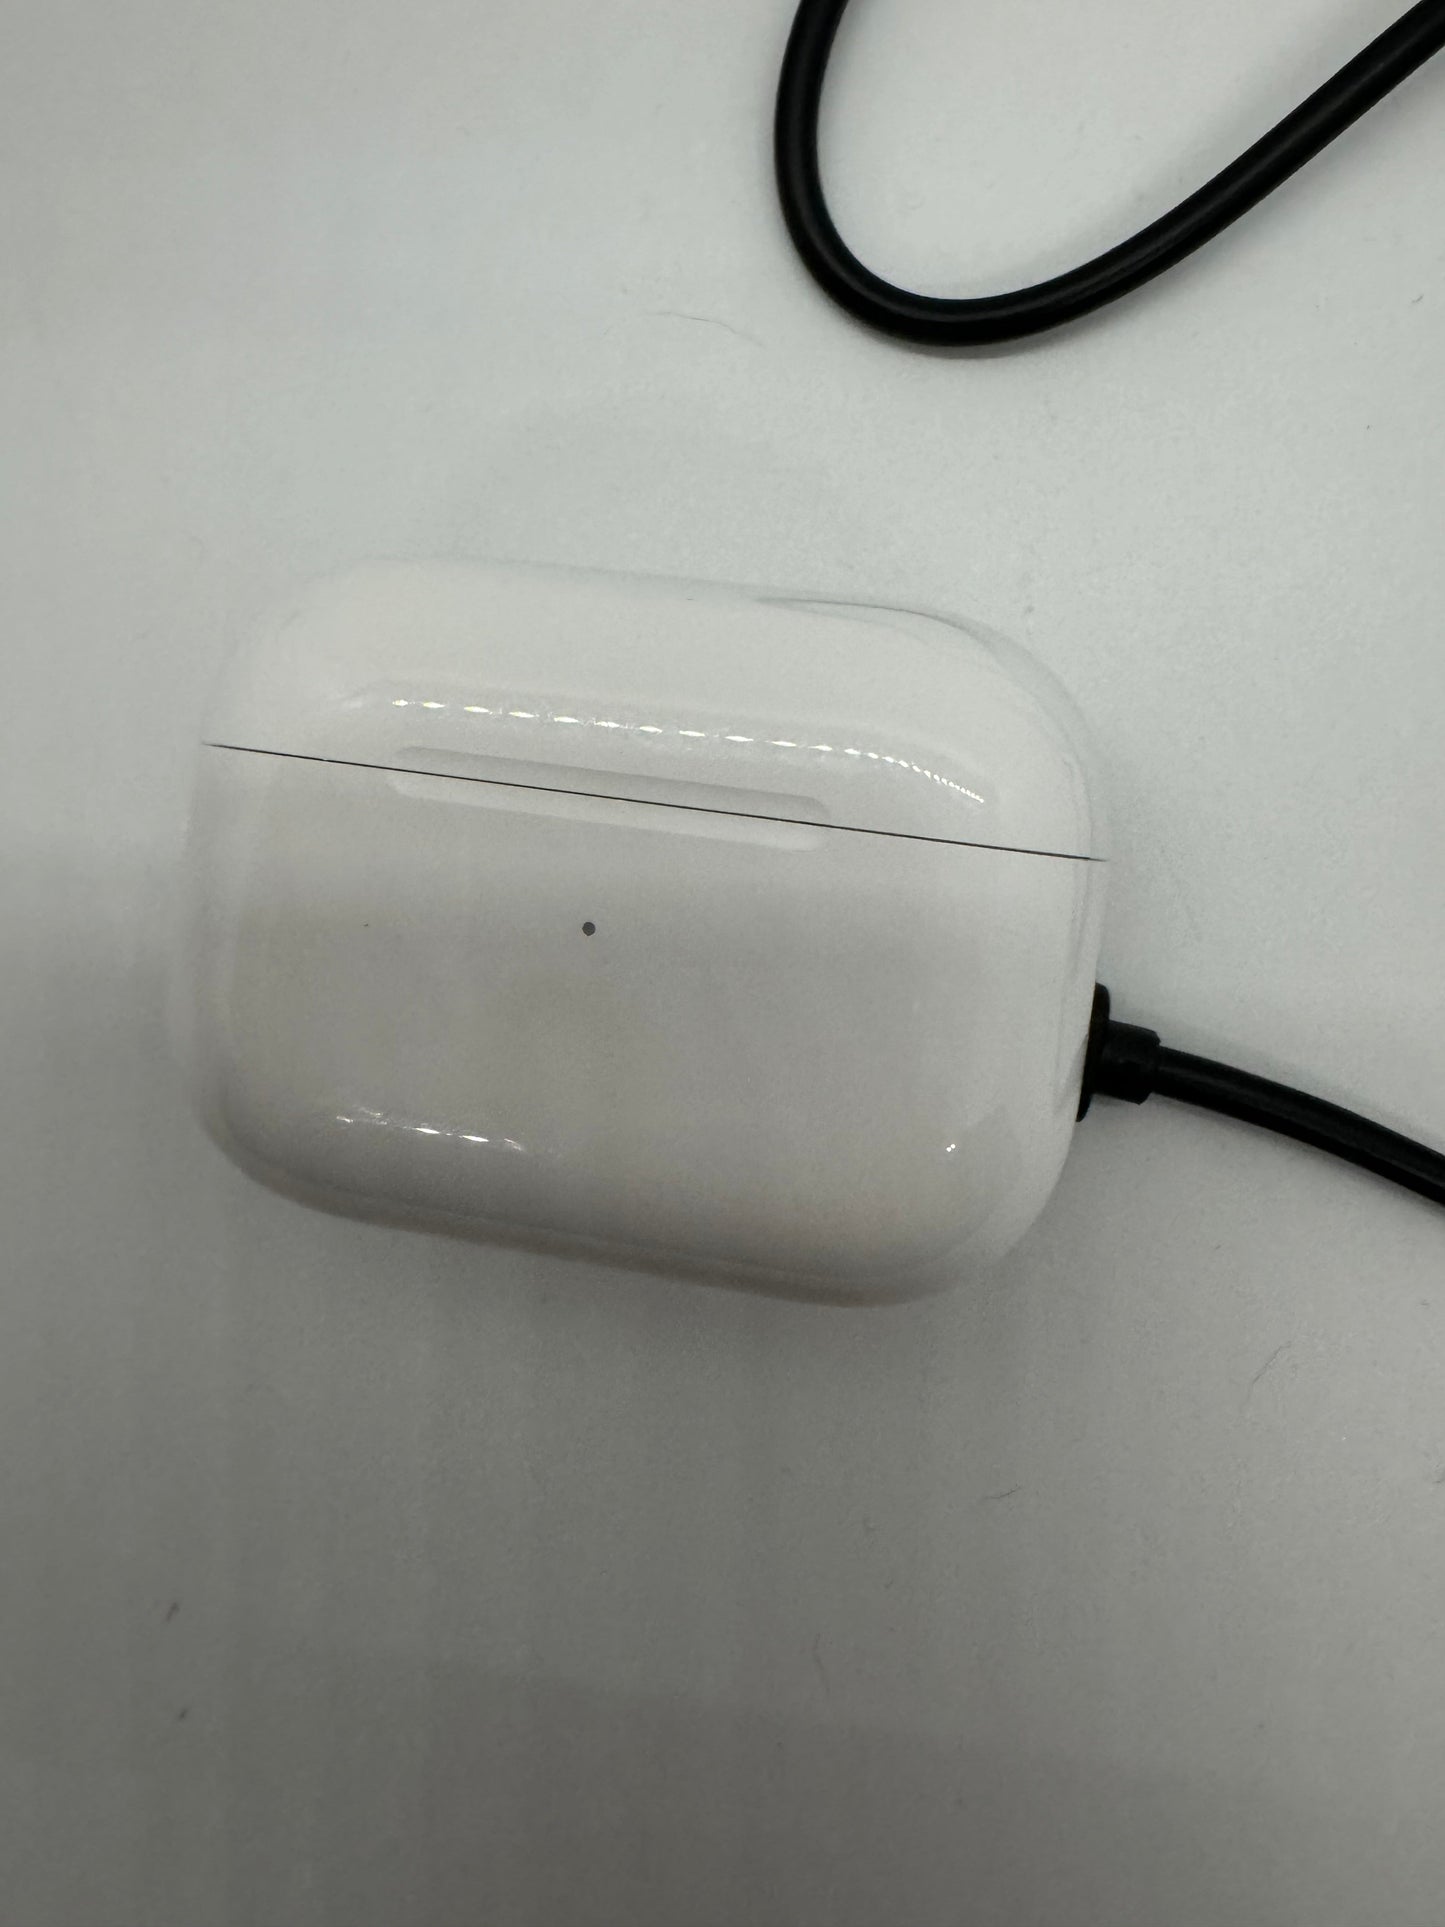 The picture shows a white AirPods case on a white surface. The case is rectangular with rounded edges and has a small LED light on the front which is not lit. There is a black cable plugged into the bottom of the case. The cable is partially visible in the top left corner of the picture. The surface the case is on appears to be a table or desk with a few minor scratches or scuffs.